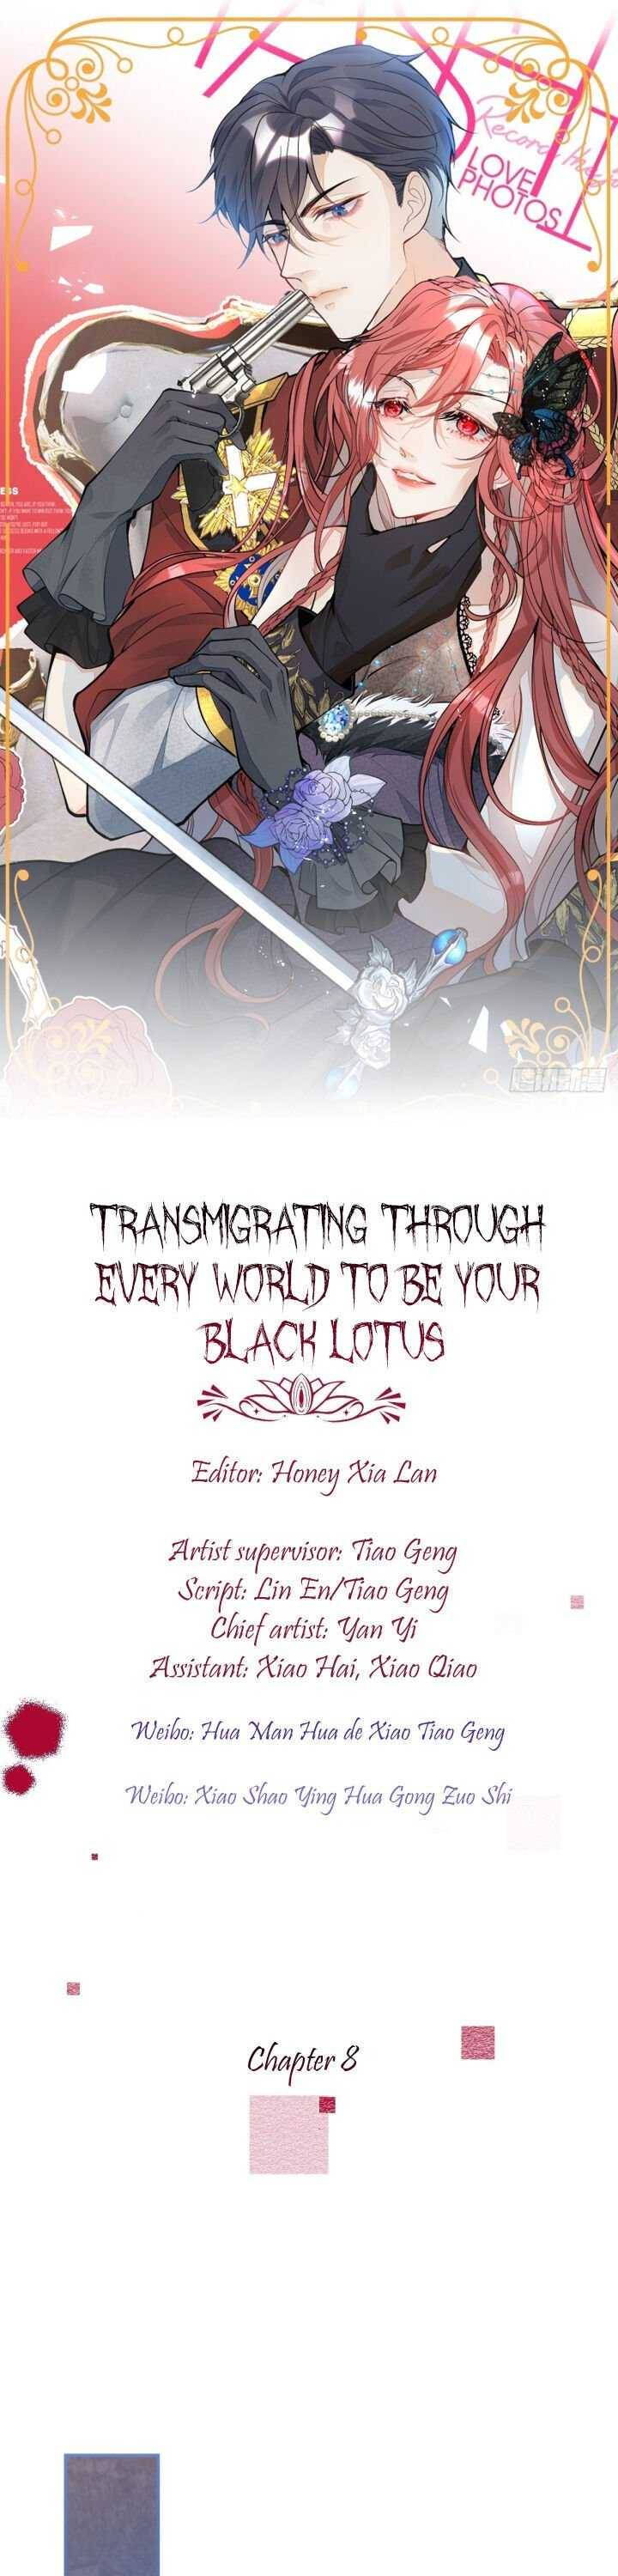 Transmigrating Through Every World to Be Your Black Lotus Chapter 8 - Page 0